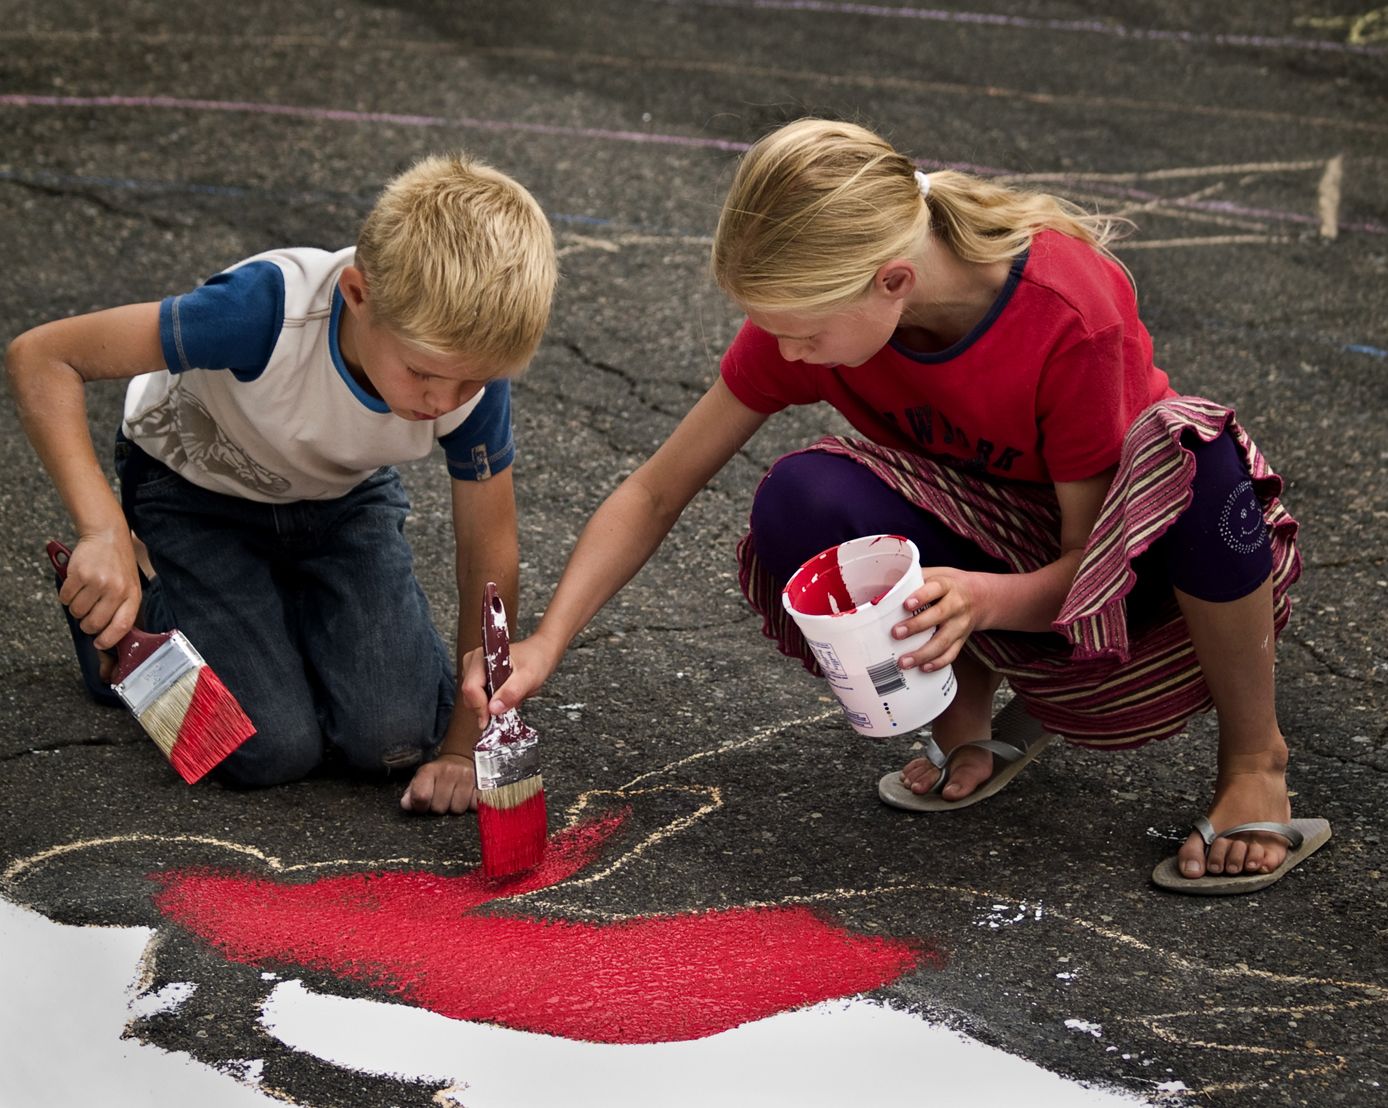 Vancouver Heights: Siblings Oleksiy and Marina Dobryden work together to help paint the Omaha Way street mural.